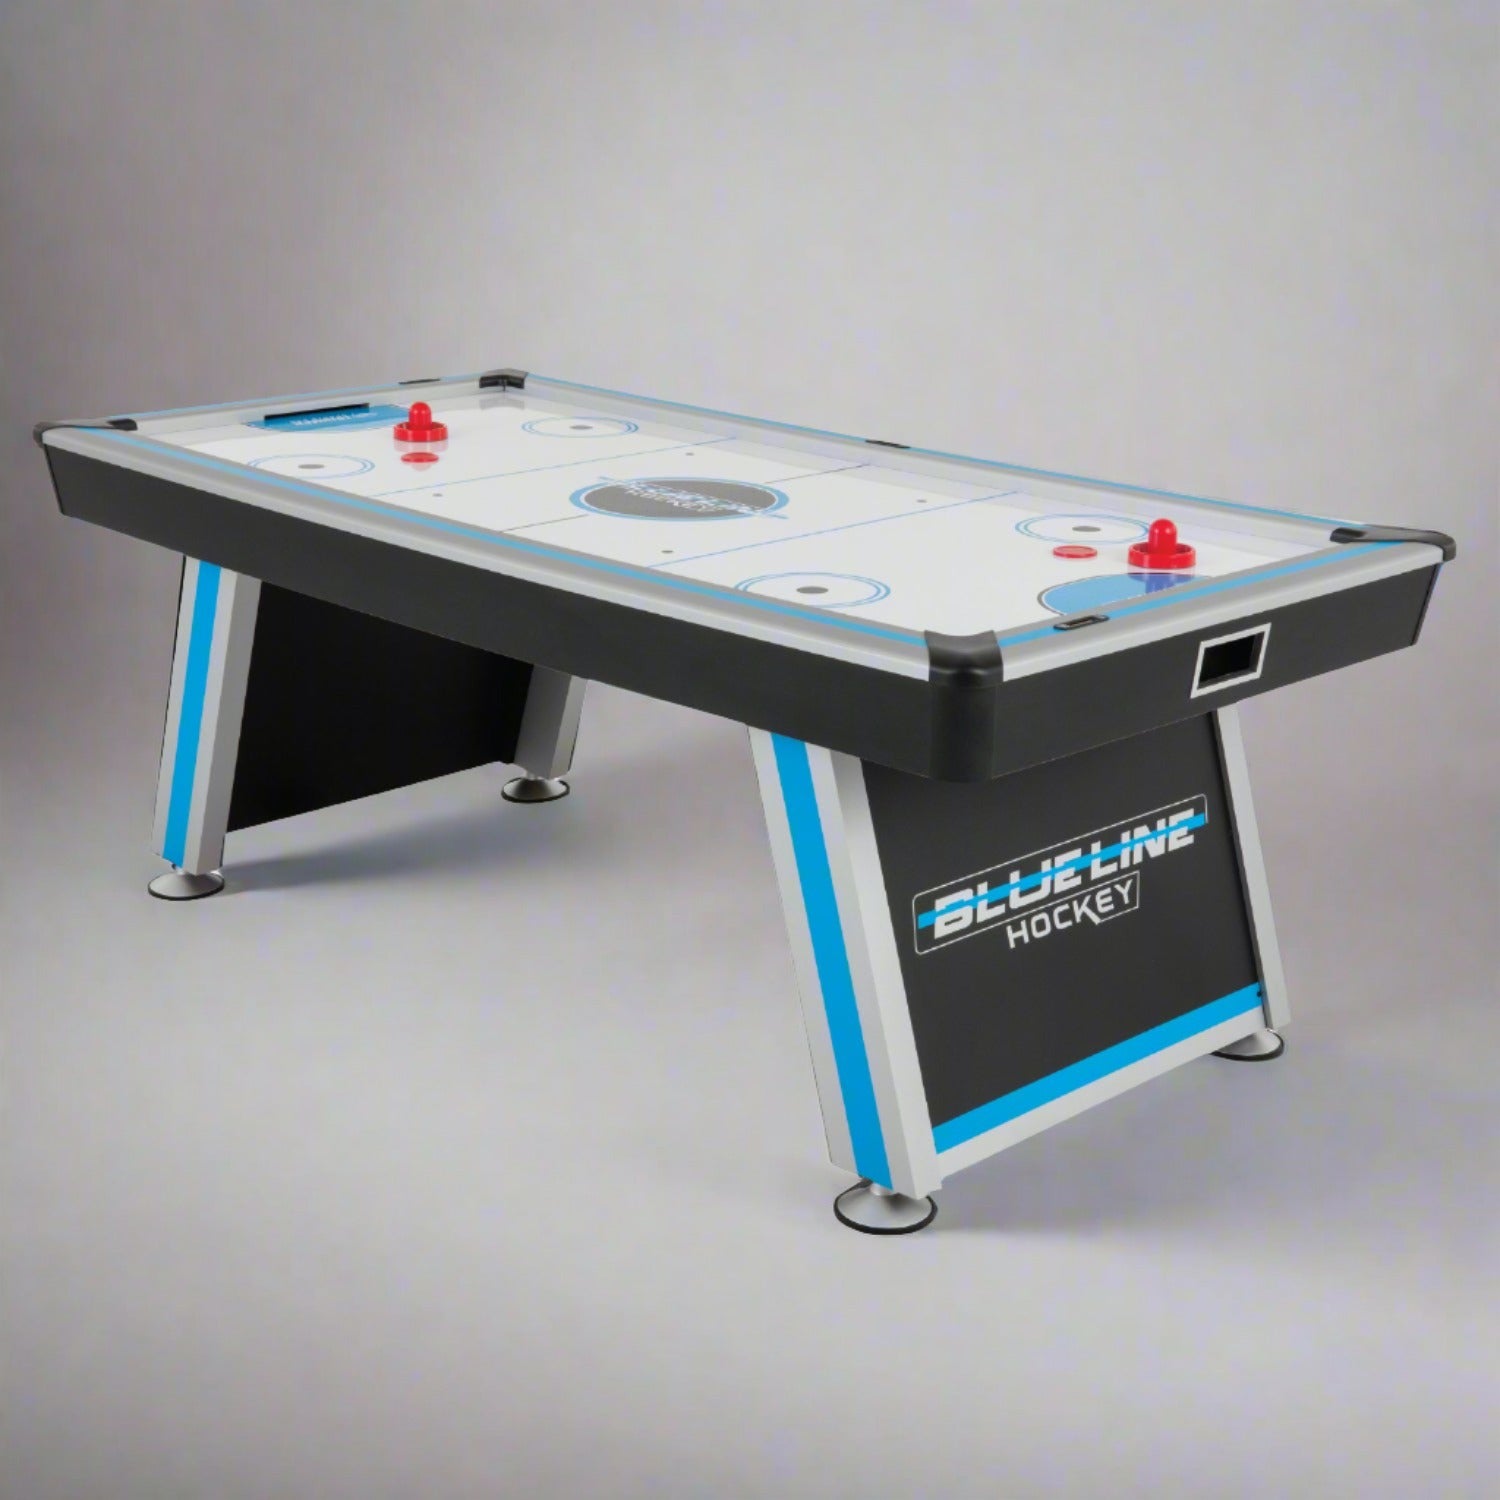 COLORFUL HOCKEY TABLE